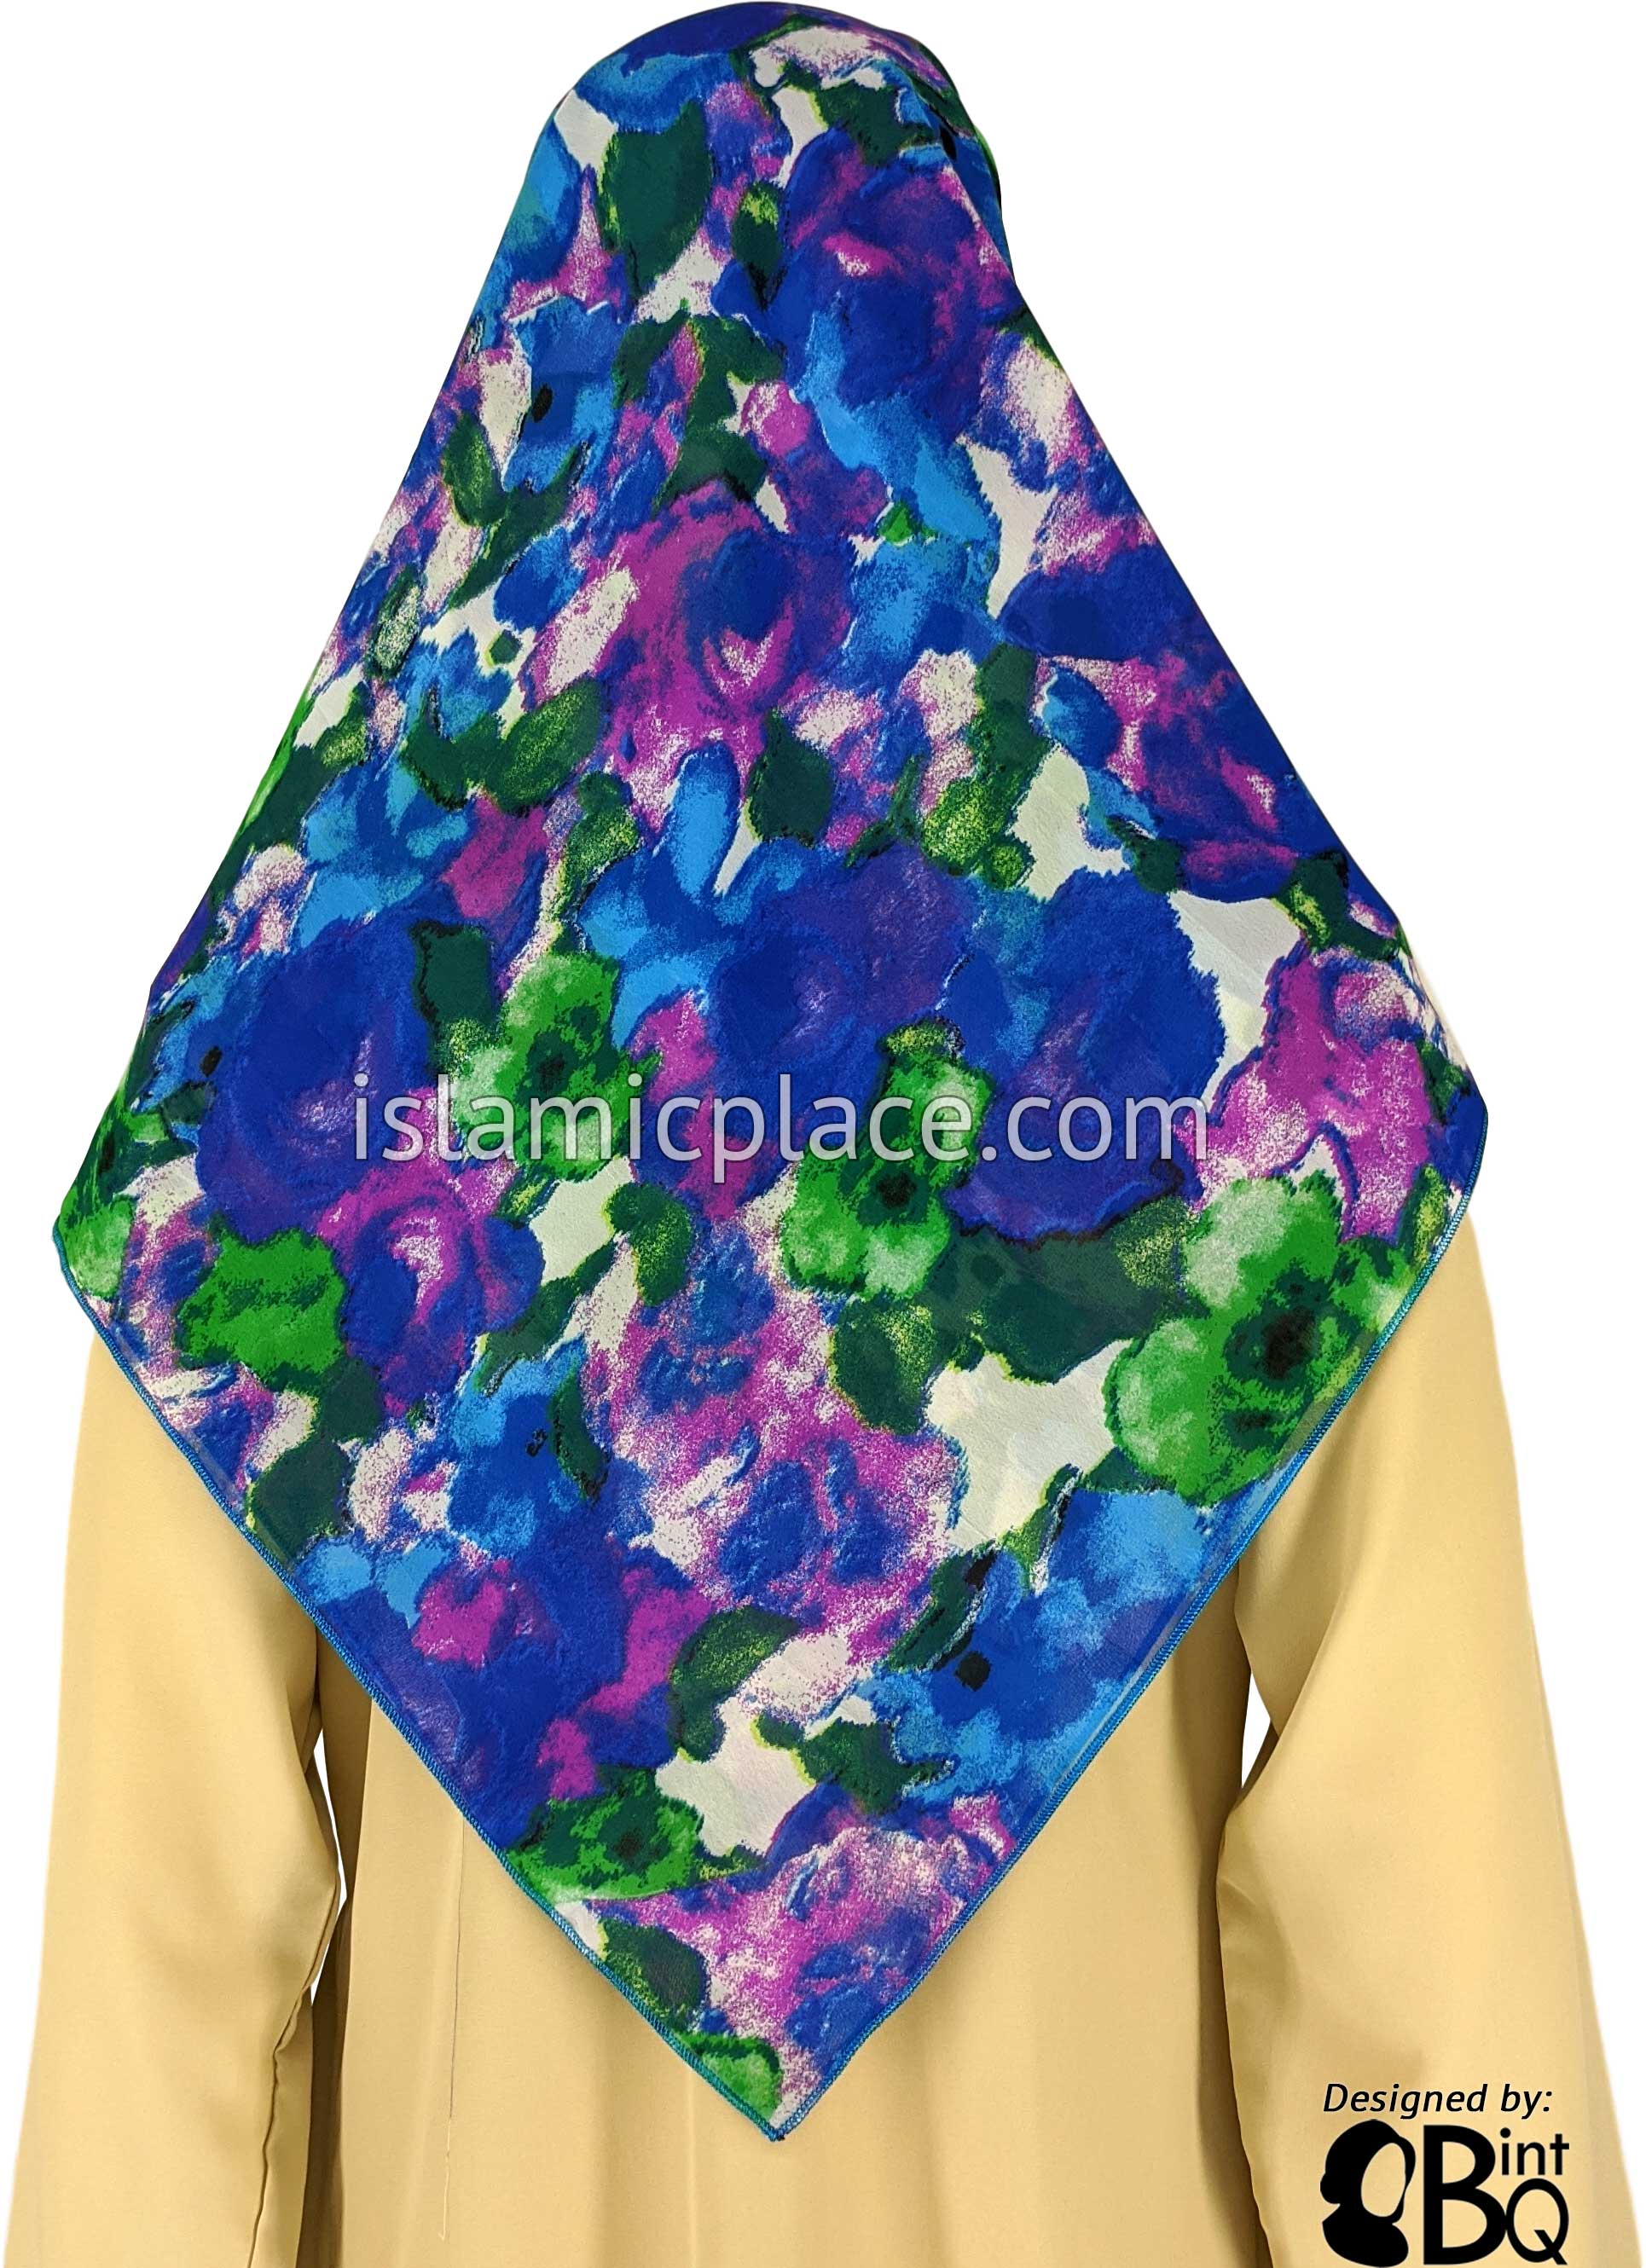 Cobalt, Blue, Green, Fuchsia And White Floral Design  - 45" Square Printed Khimar